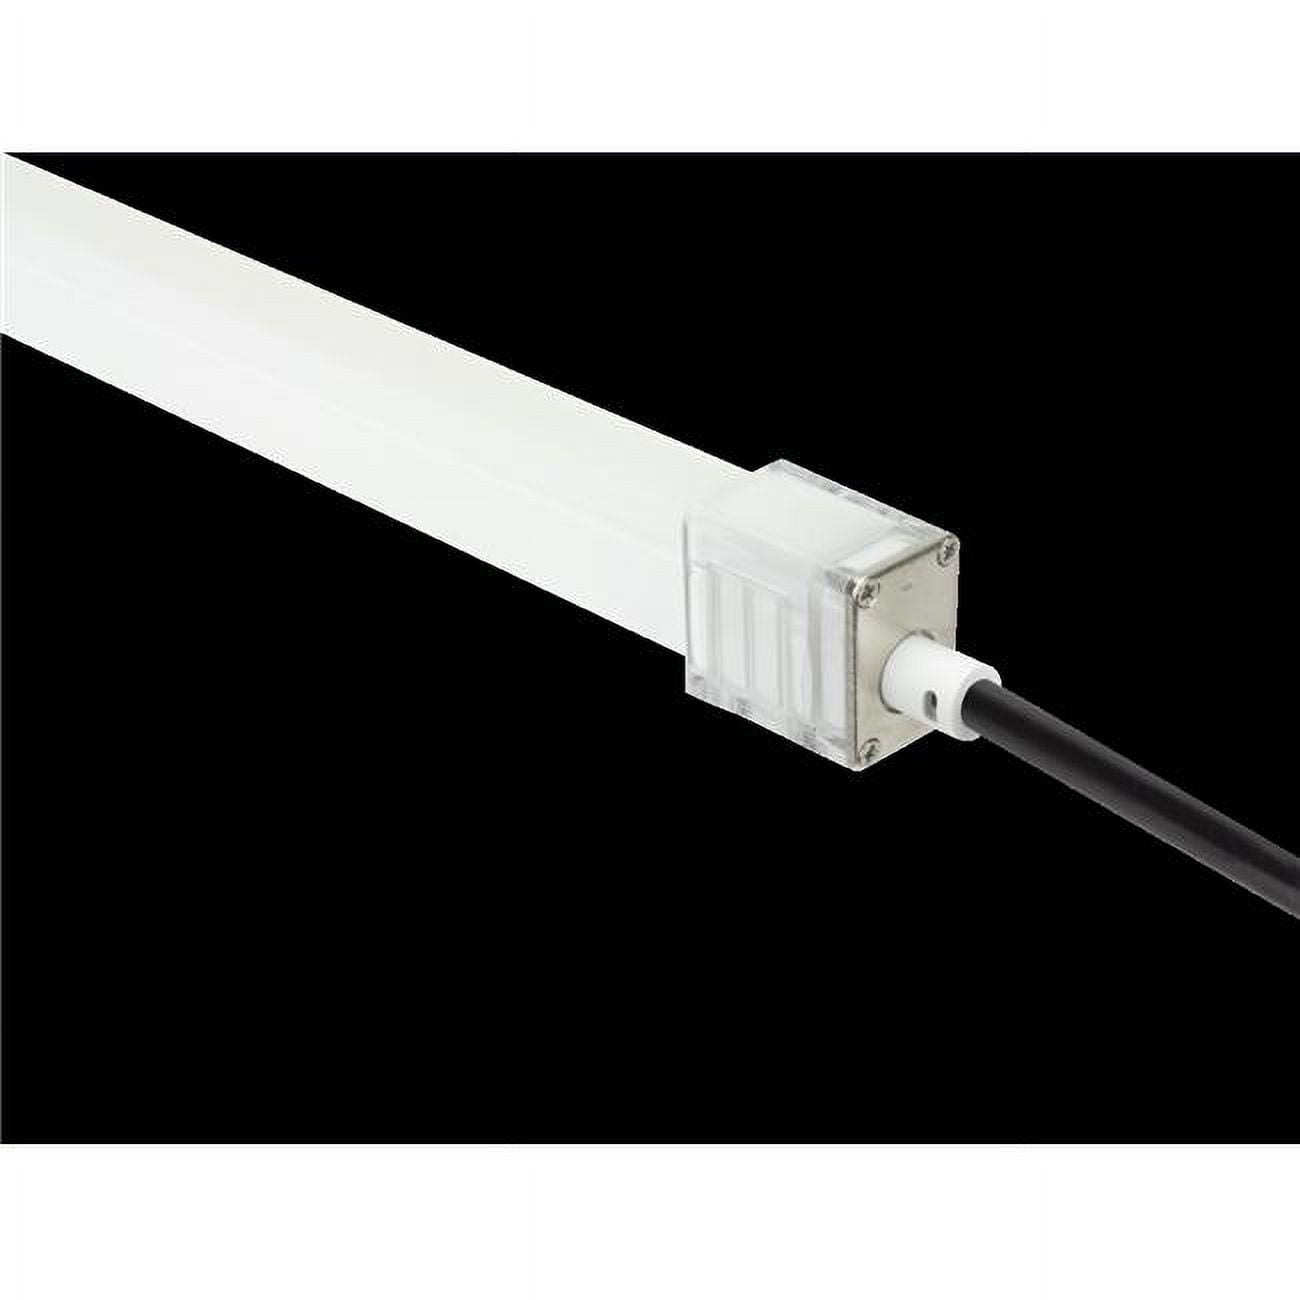 NFPROL-CONKIT-2PIN-FRNTR 36 in. NeonFlex L Conkit - Power Feed for Lateral, 2-Pin, Front Right, White -  American Lighting